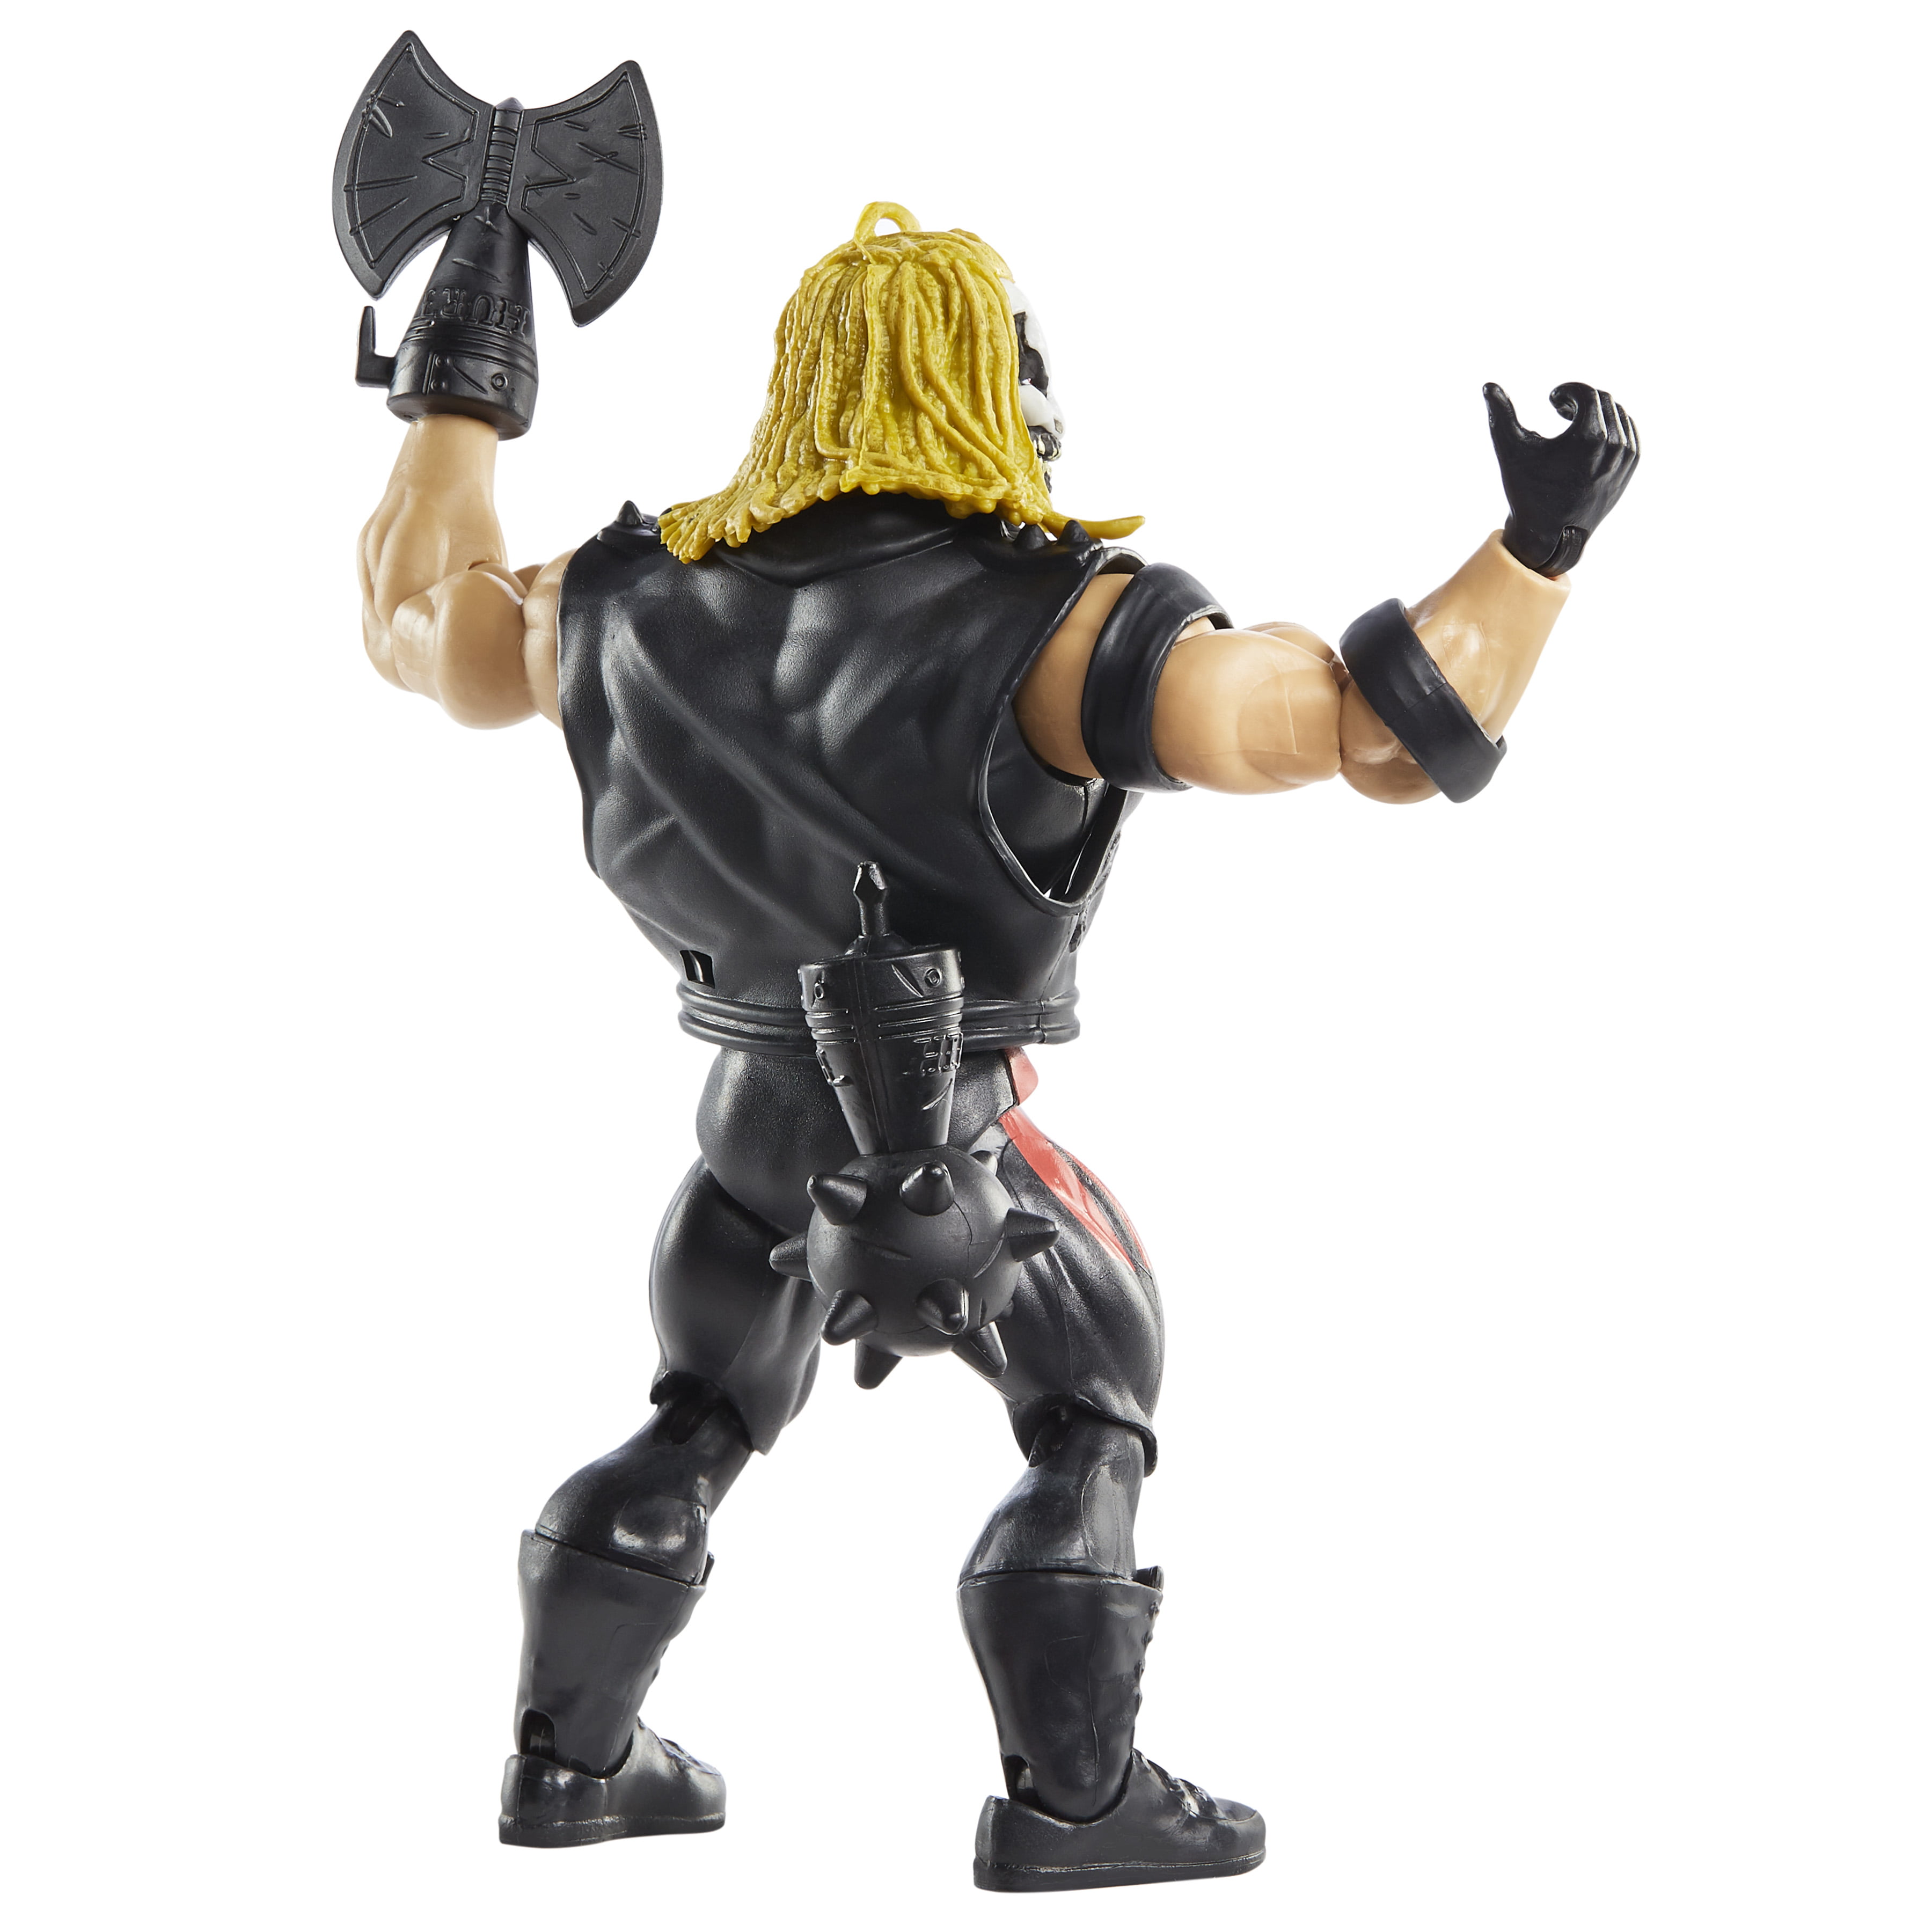 0887961868098 Mattel Masters of the WWE Universe  "The Fiend" Bray Wyatt Action Figure for sale online 